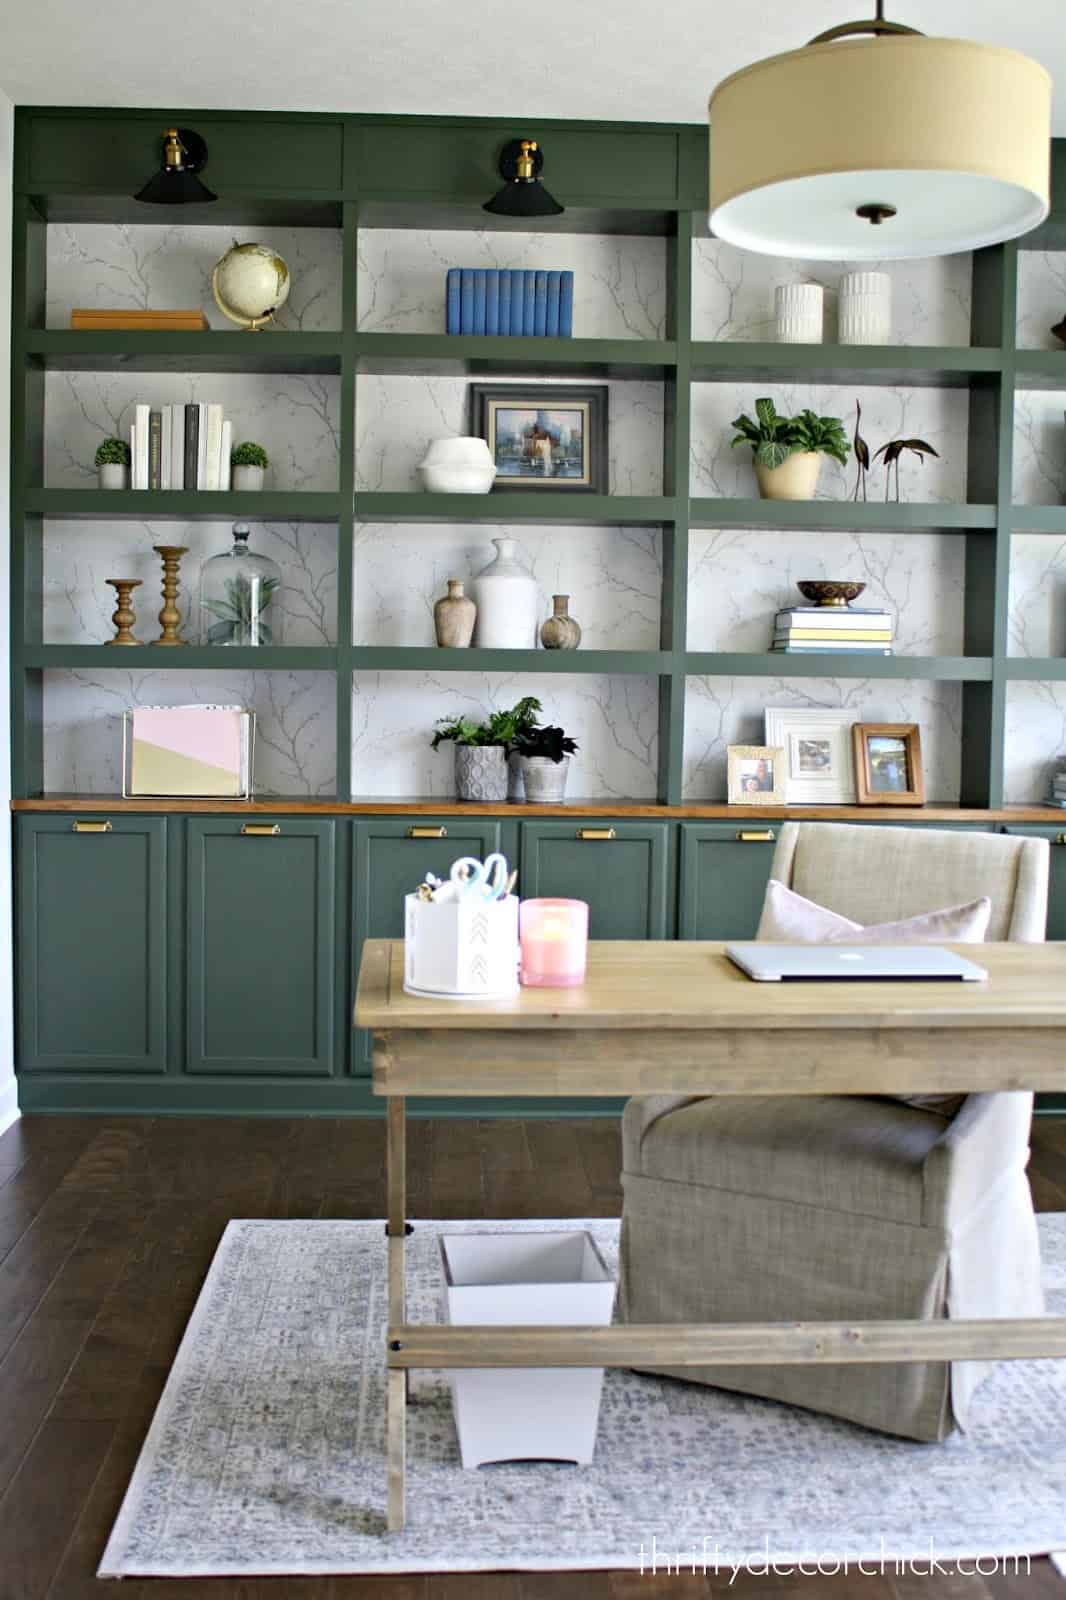 Book Storage Ideas and Inspiration